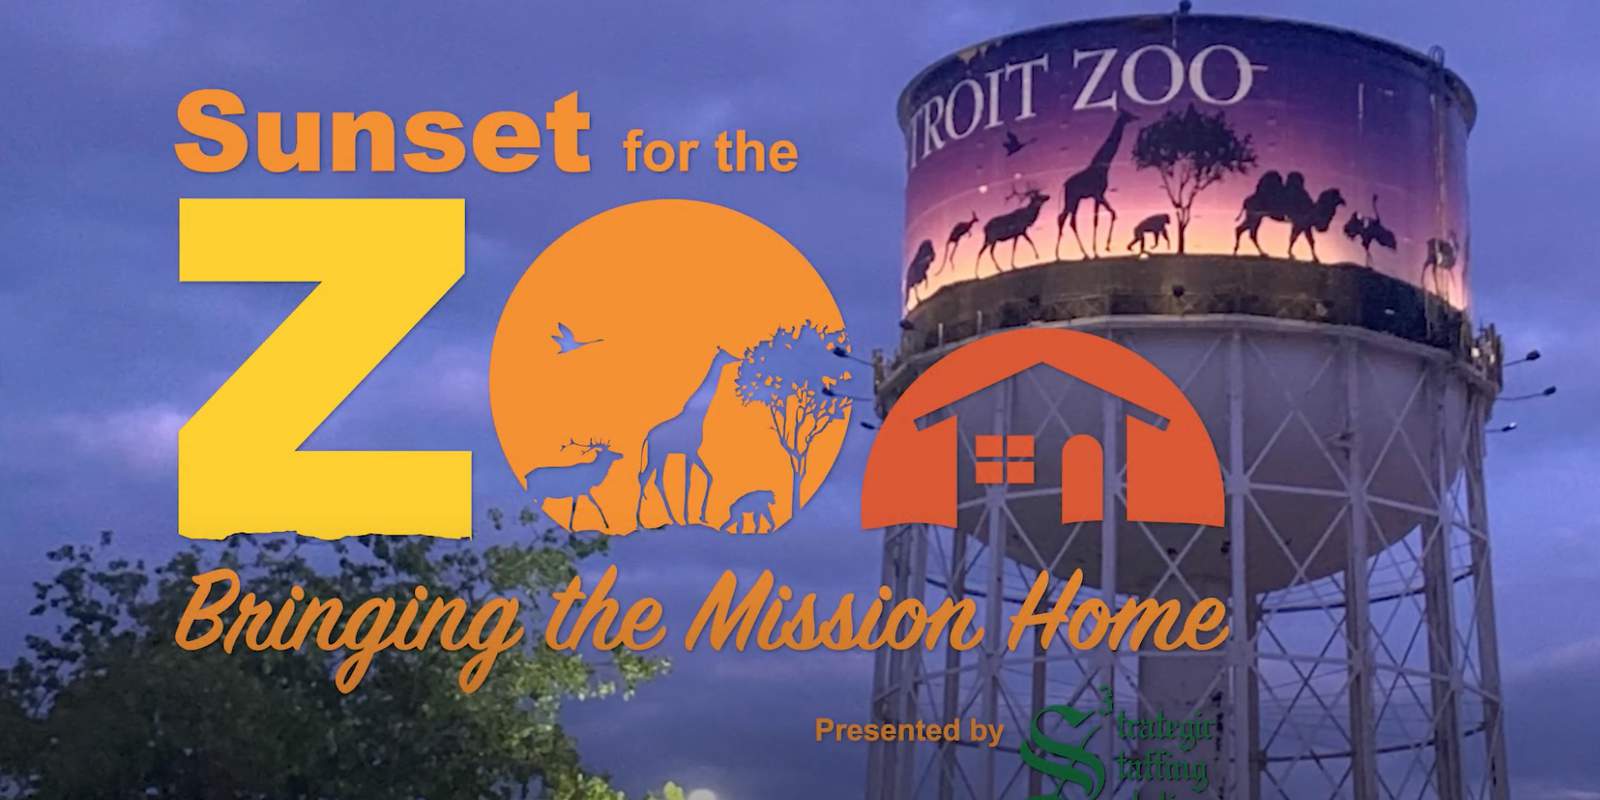 WATCH: Detroit Zoo’s ‘Sunset for the Zoo: Bringing the Mission Home’